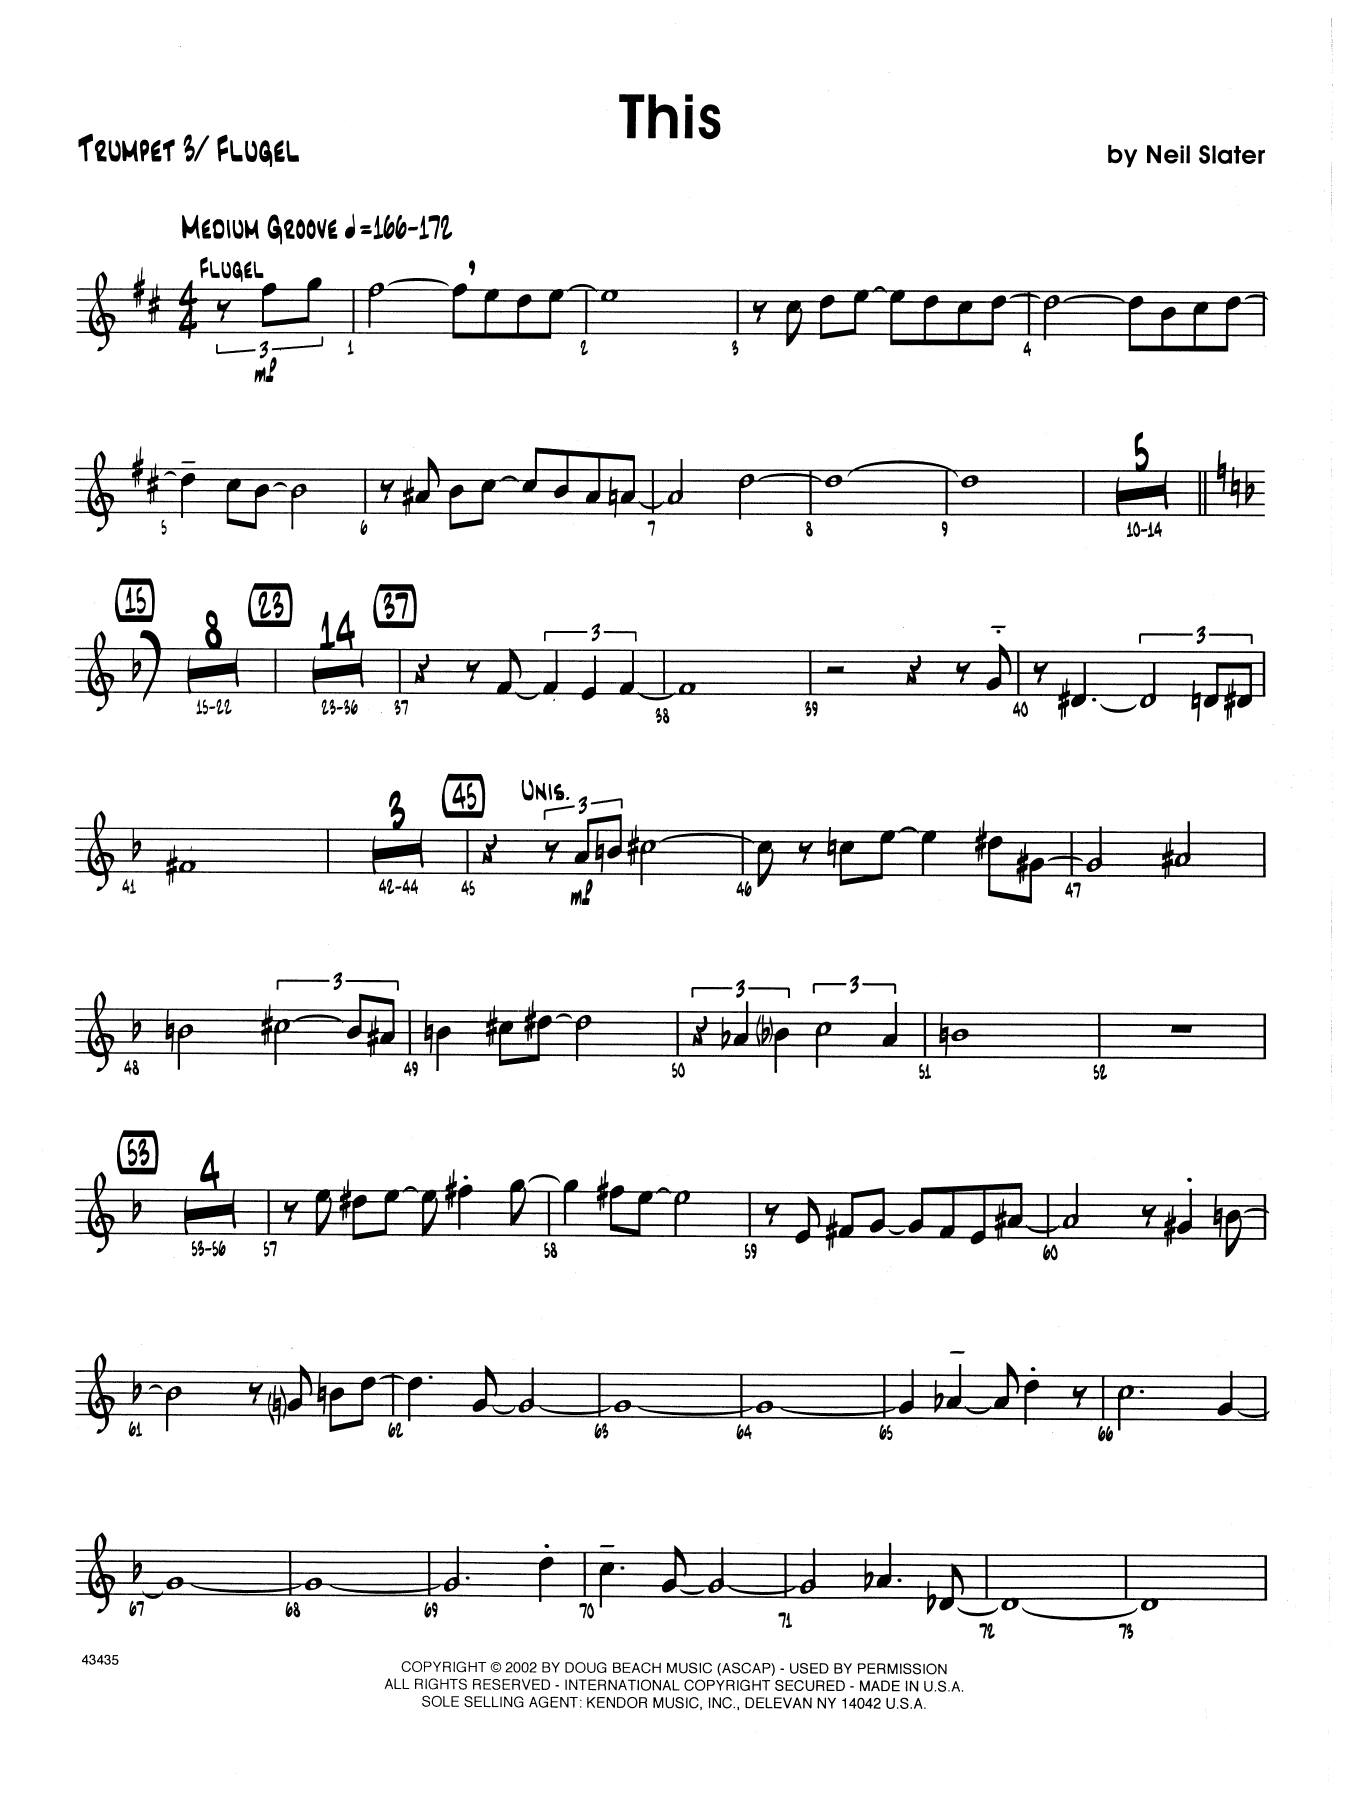 Download Neil Slater This - 3rd Bb Trumpet Sheet Music